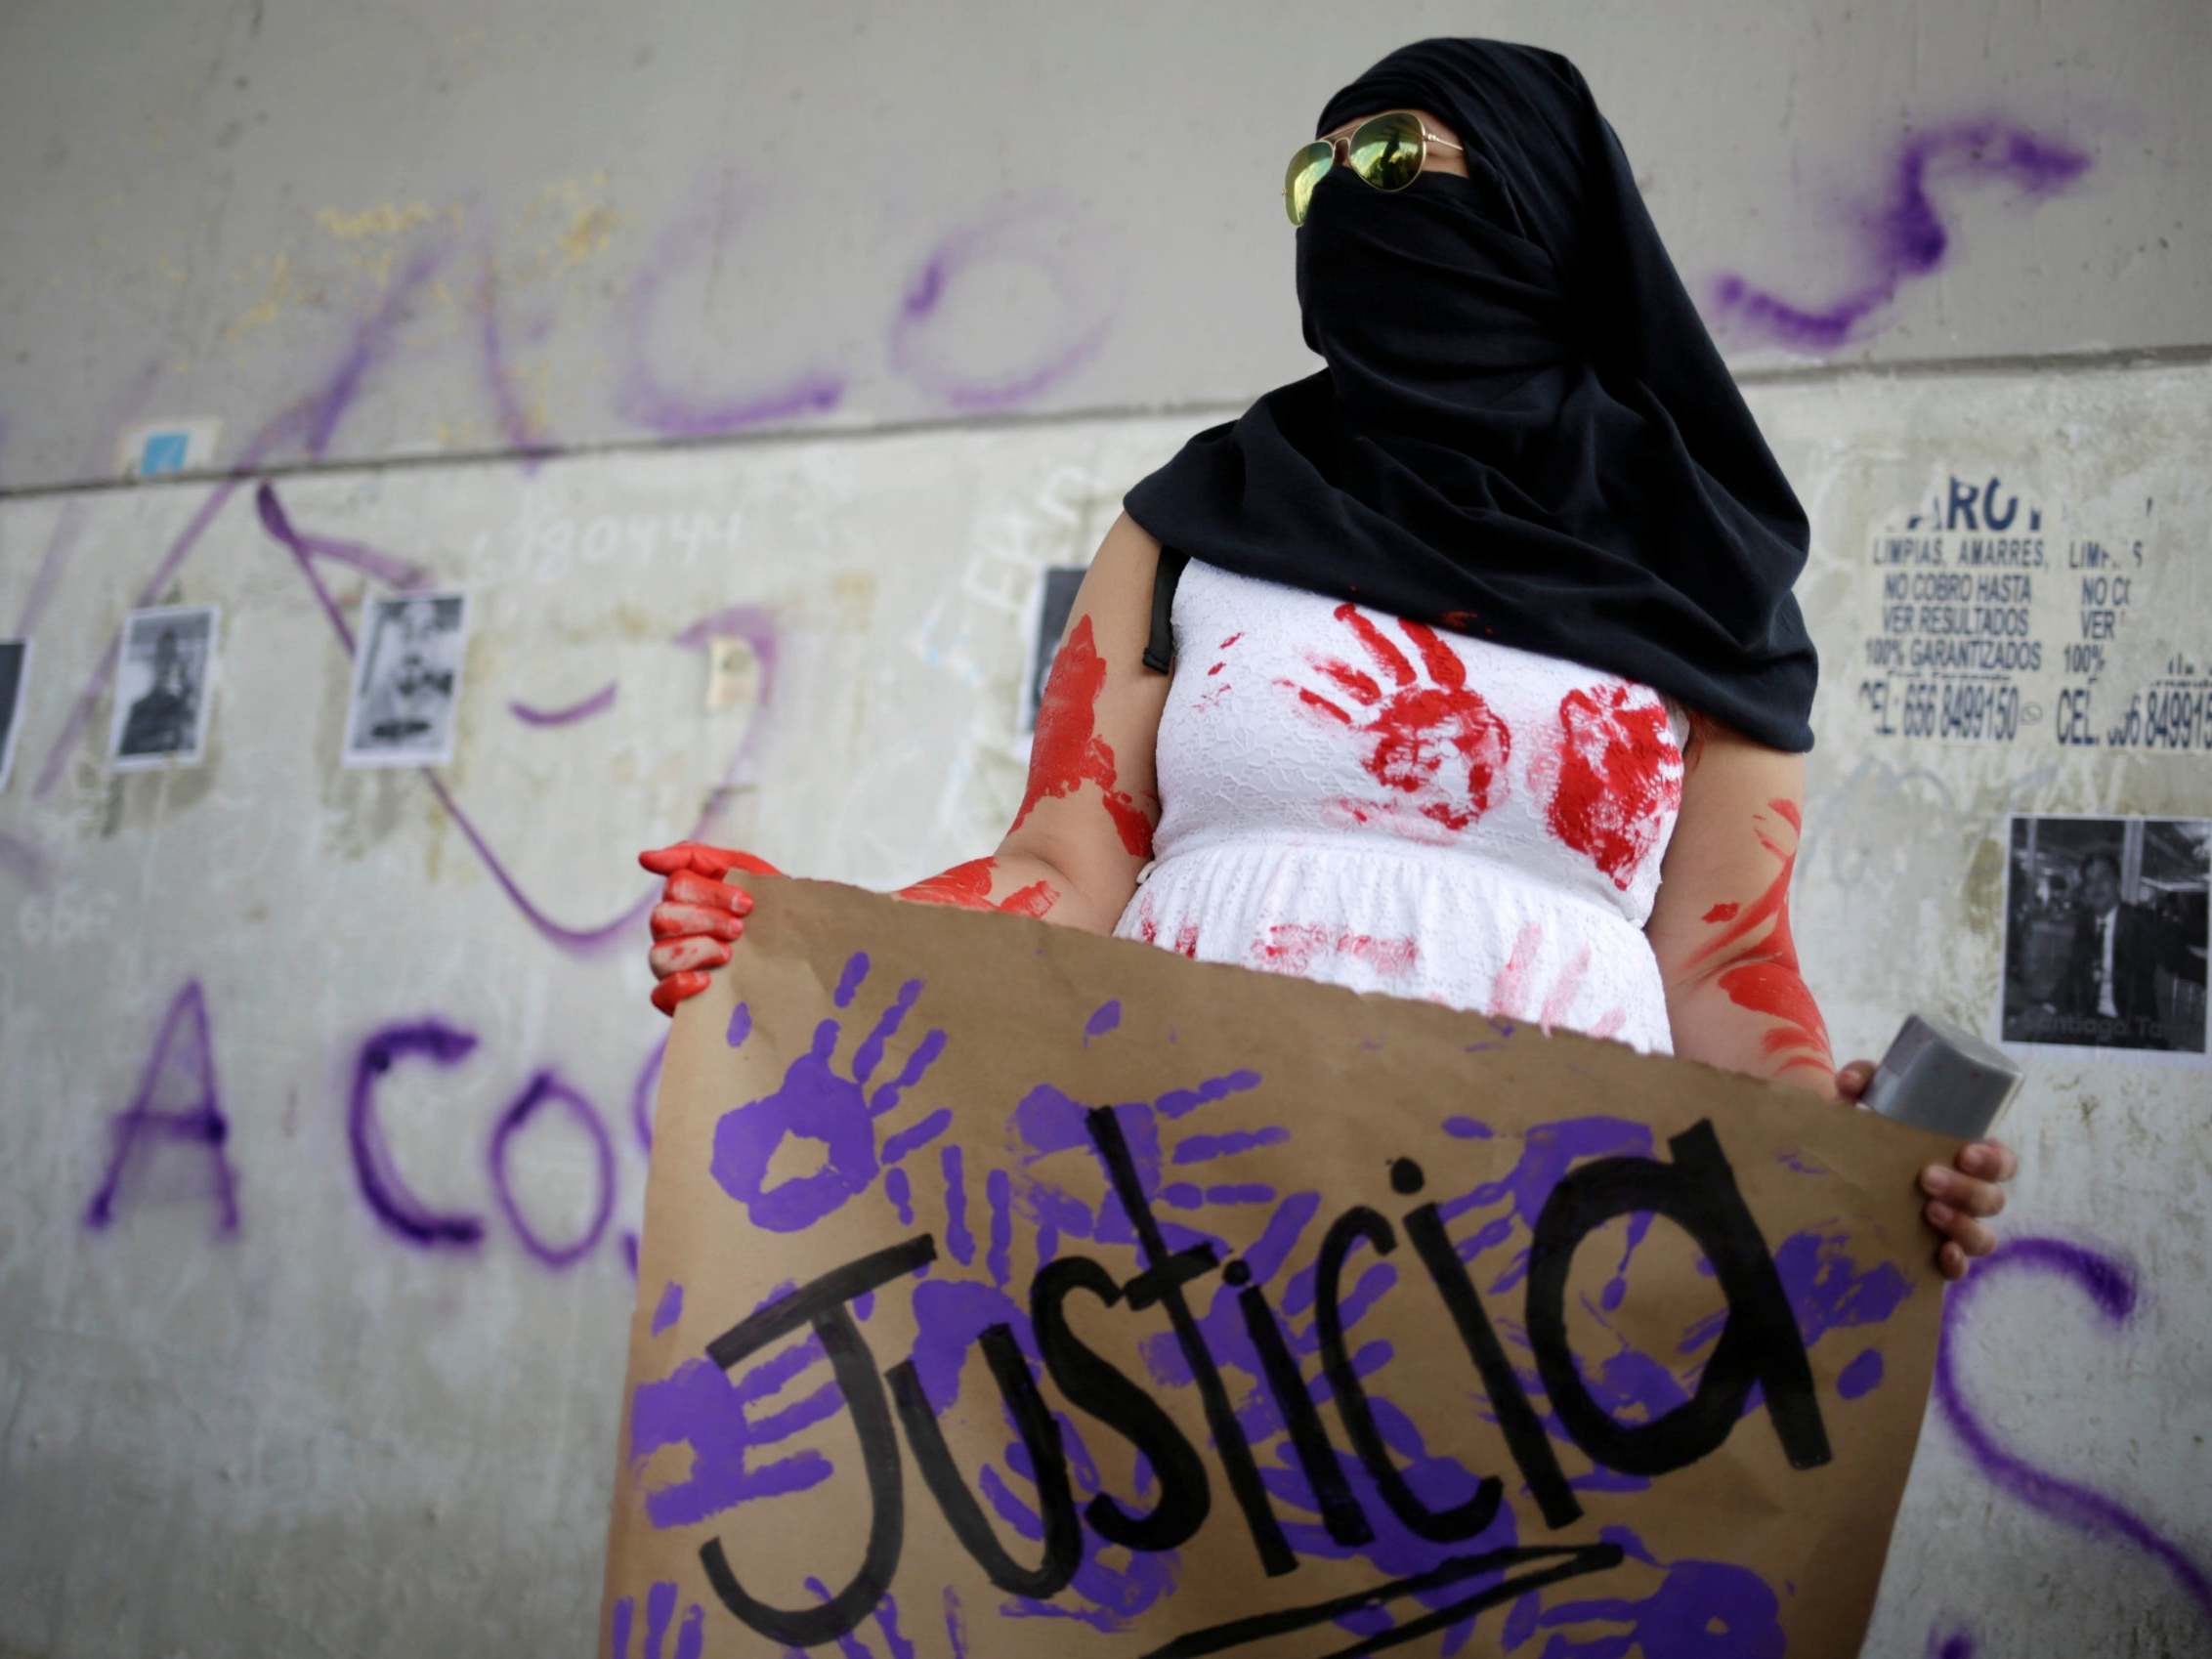 Women across Mexico have been protesting against femicide in recent months